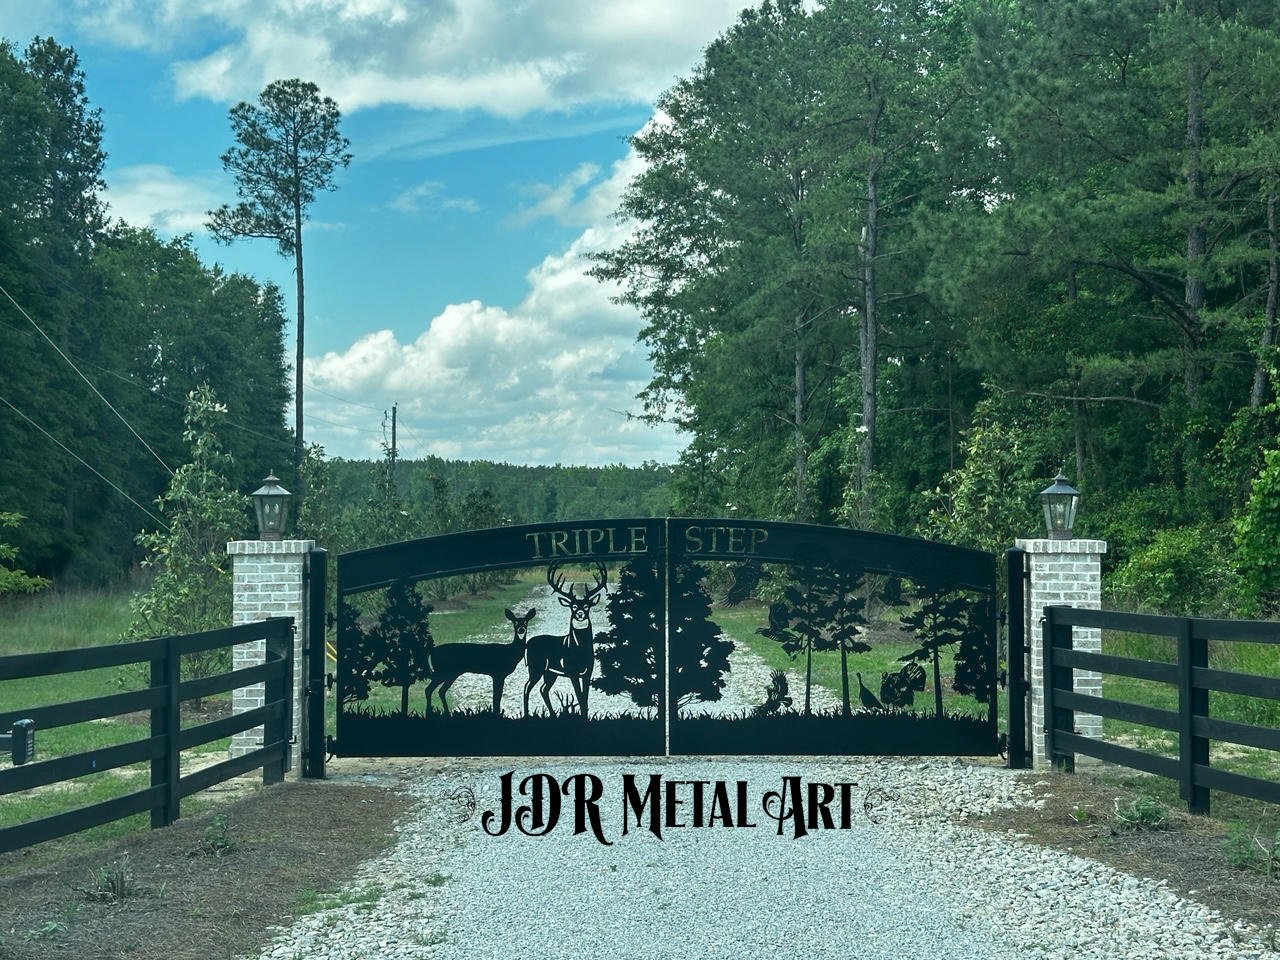 Atlanta driveway gates custom built from plasma cut steel with artistic gate design by JDR Metal Art. Atlanta driveway gates near me for iron driveway gate design ideas perfect for a ranch entrance.